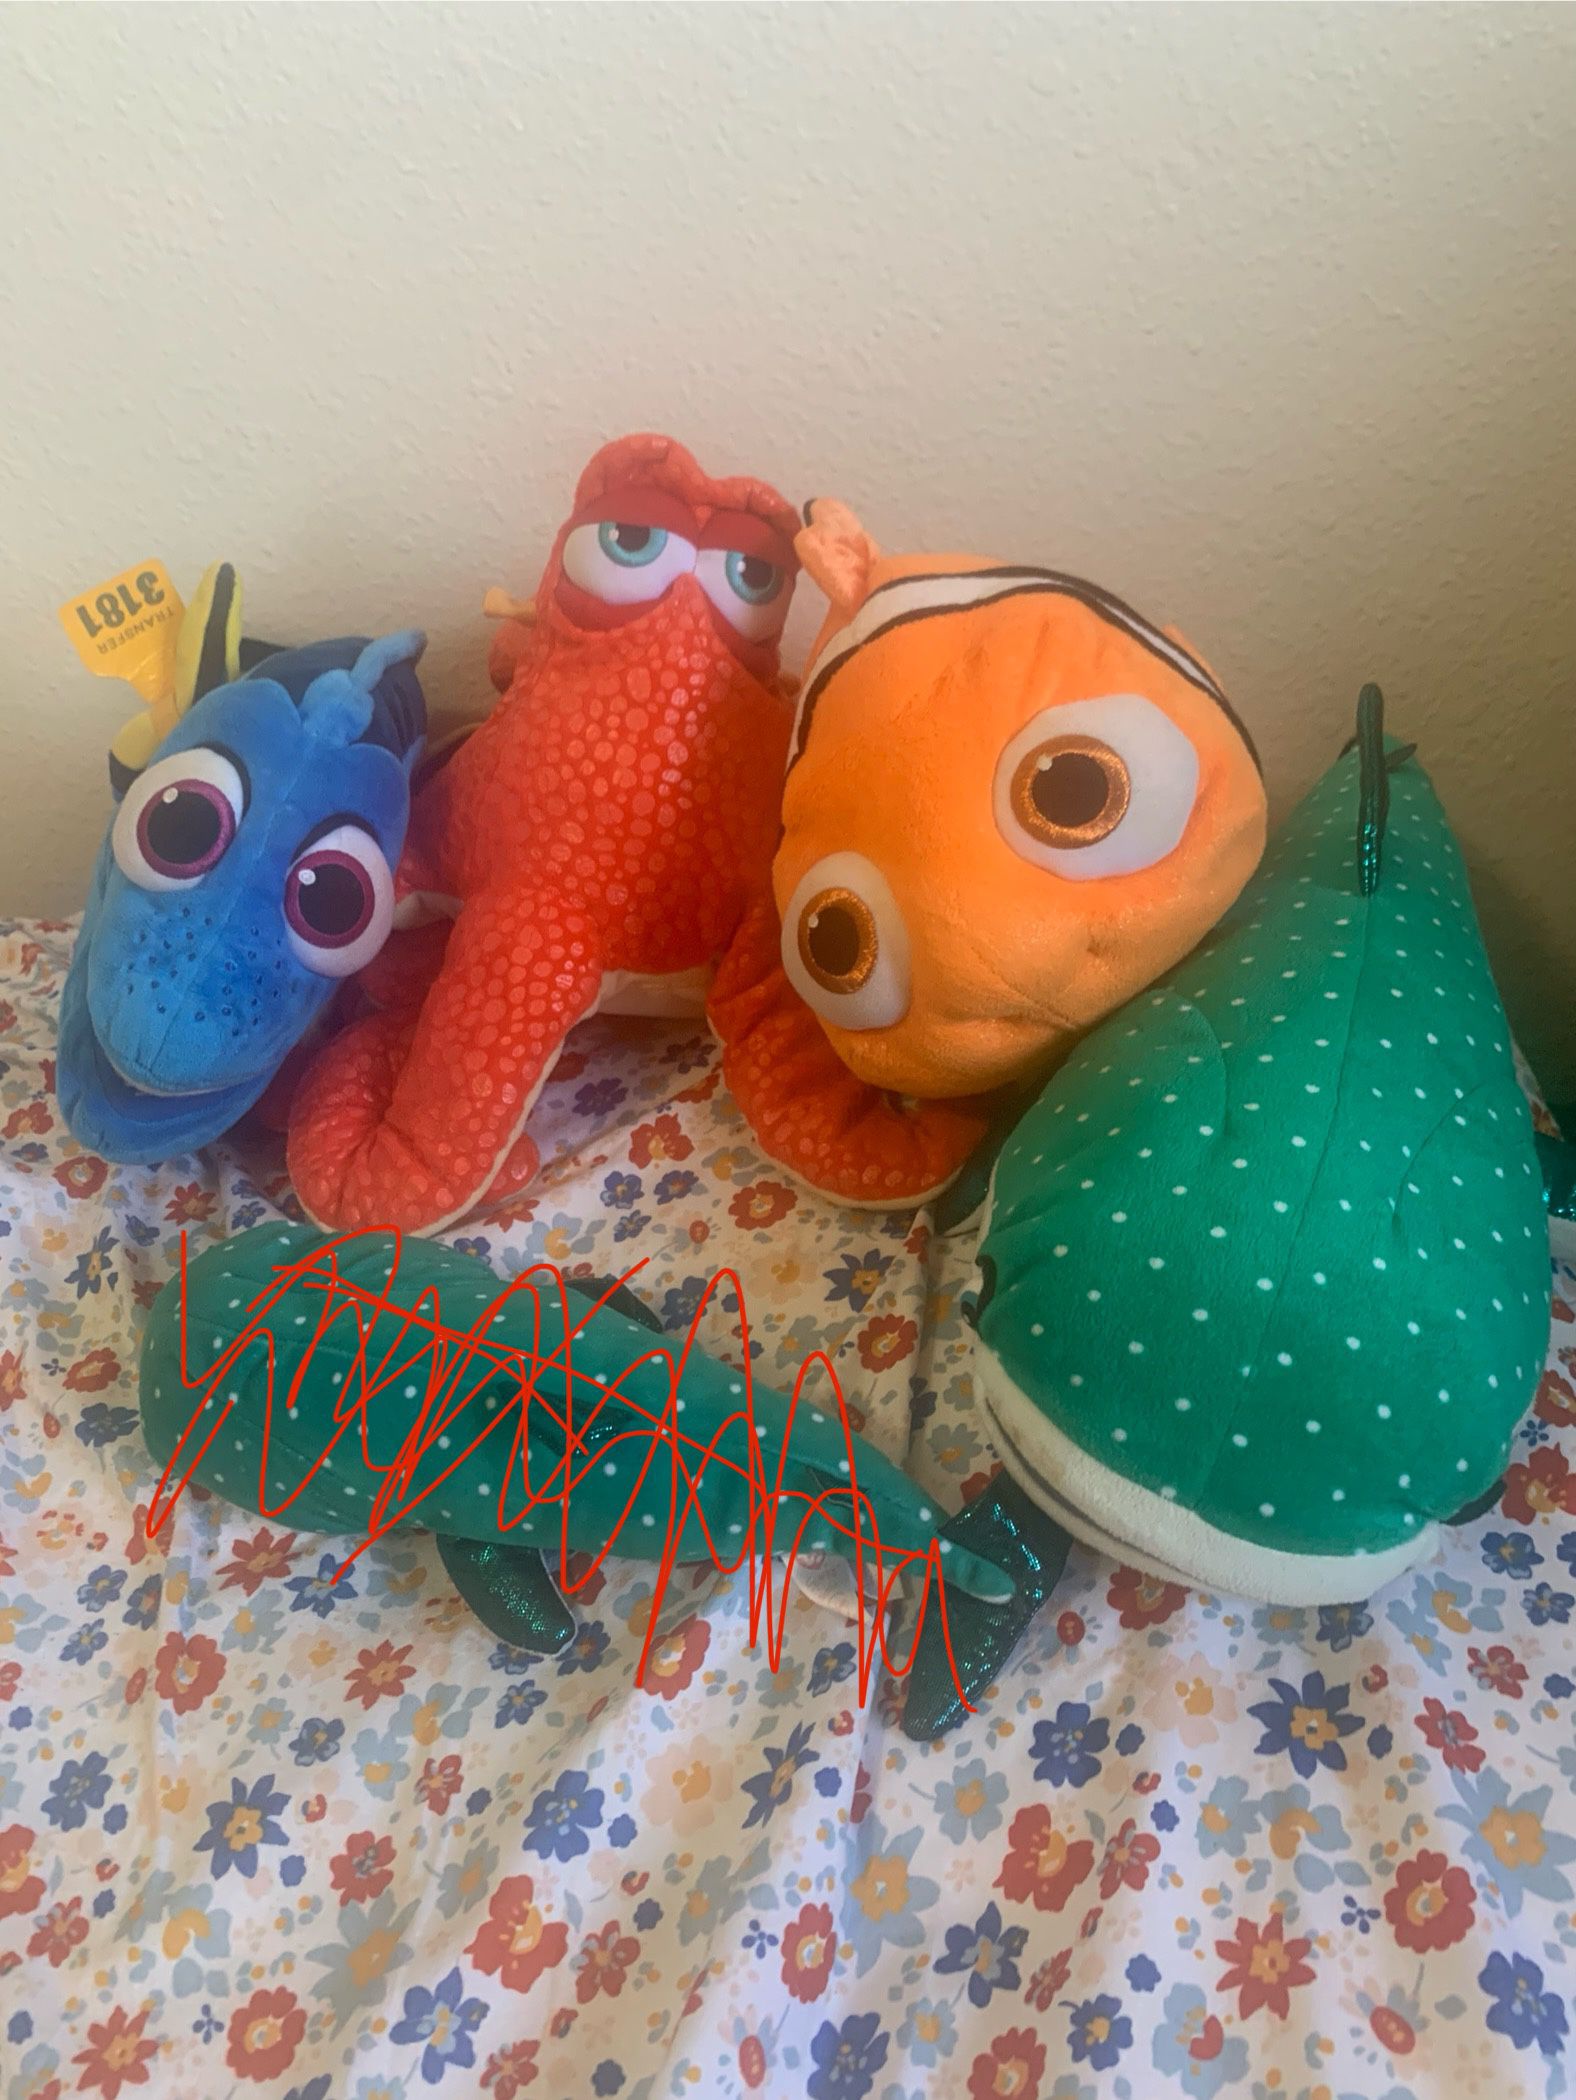 Finding Nemo/Finding Dory Stuffies